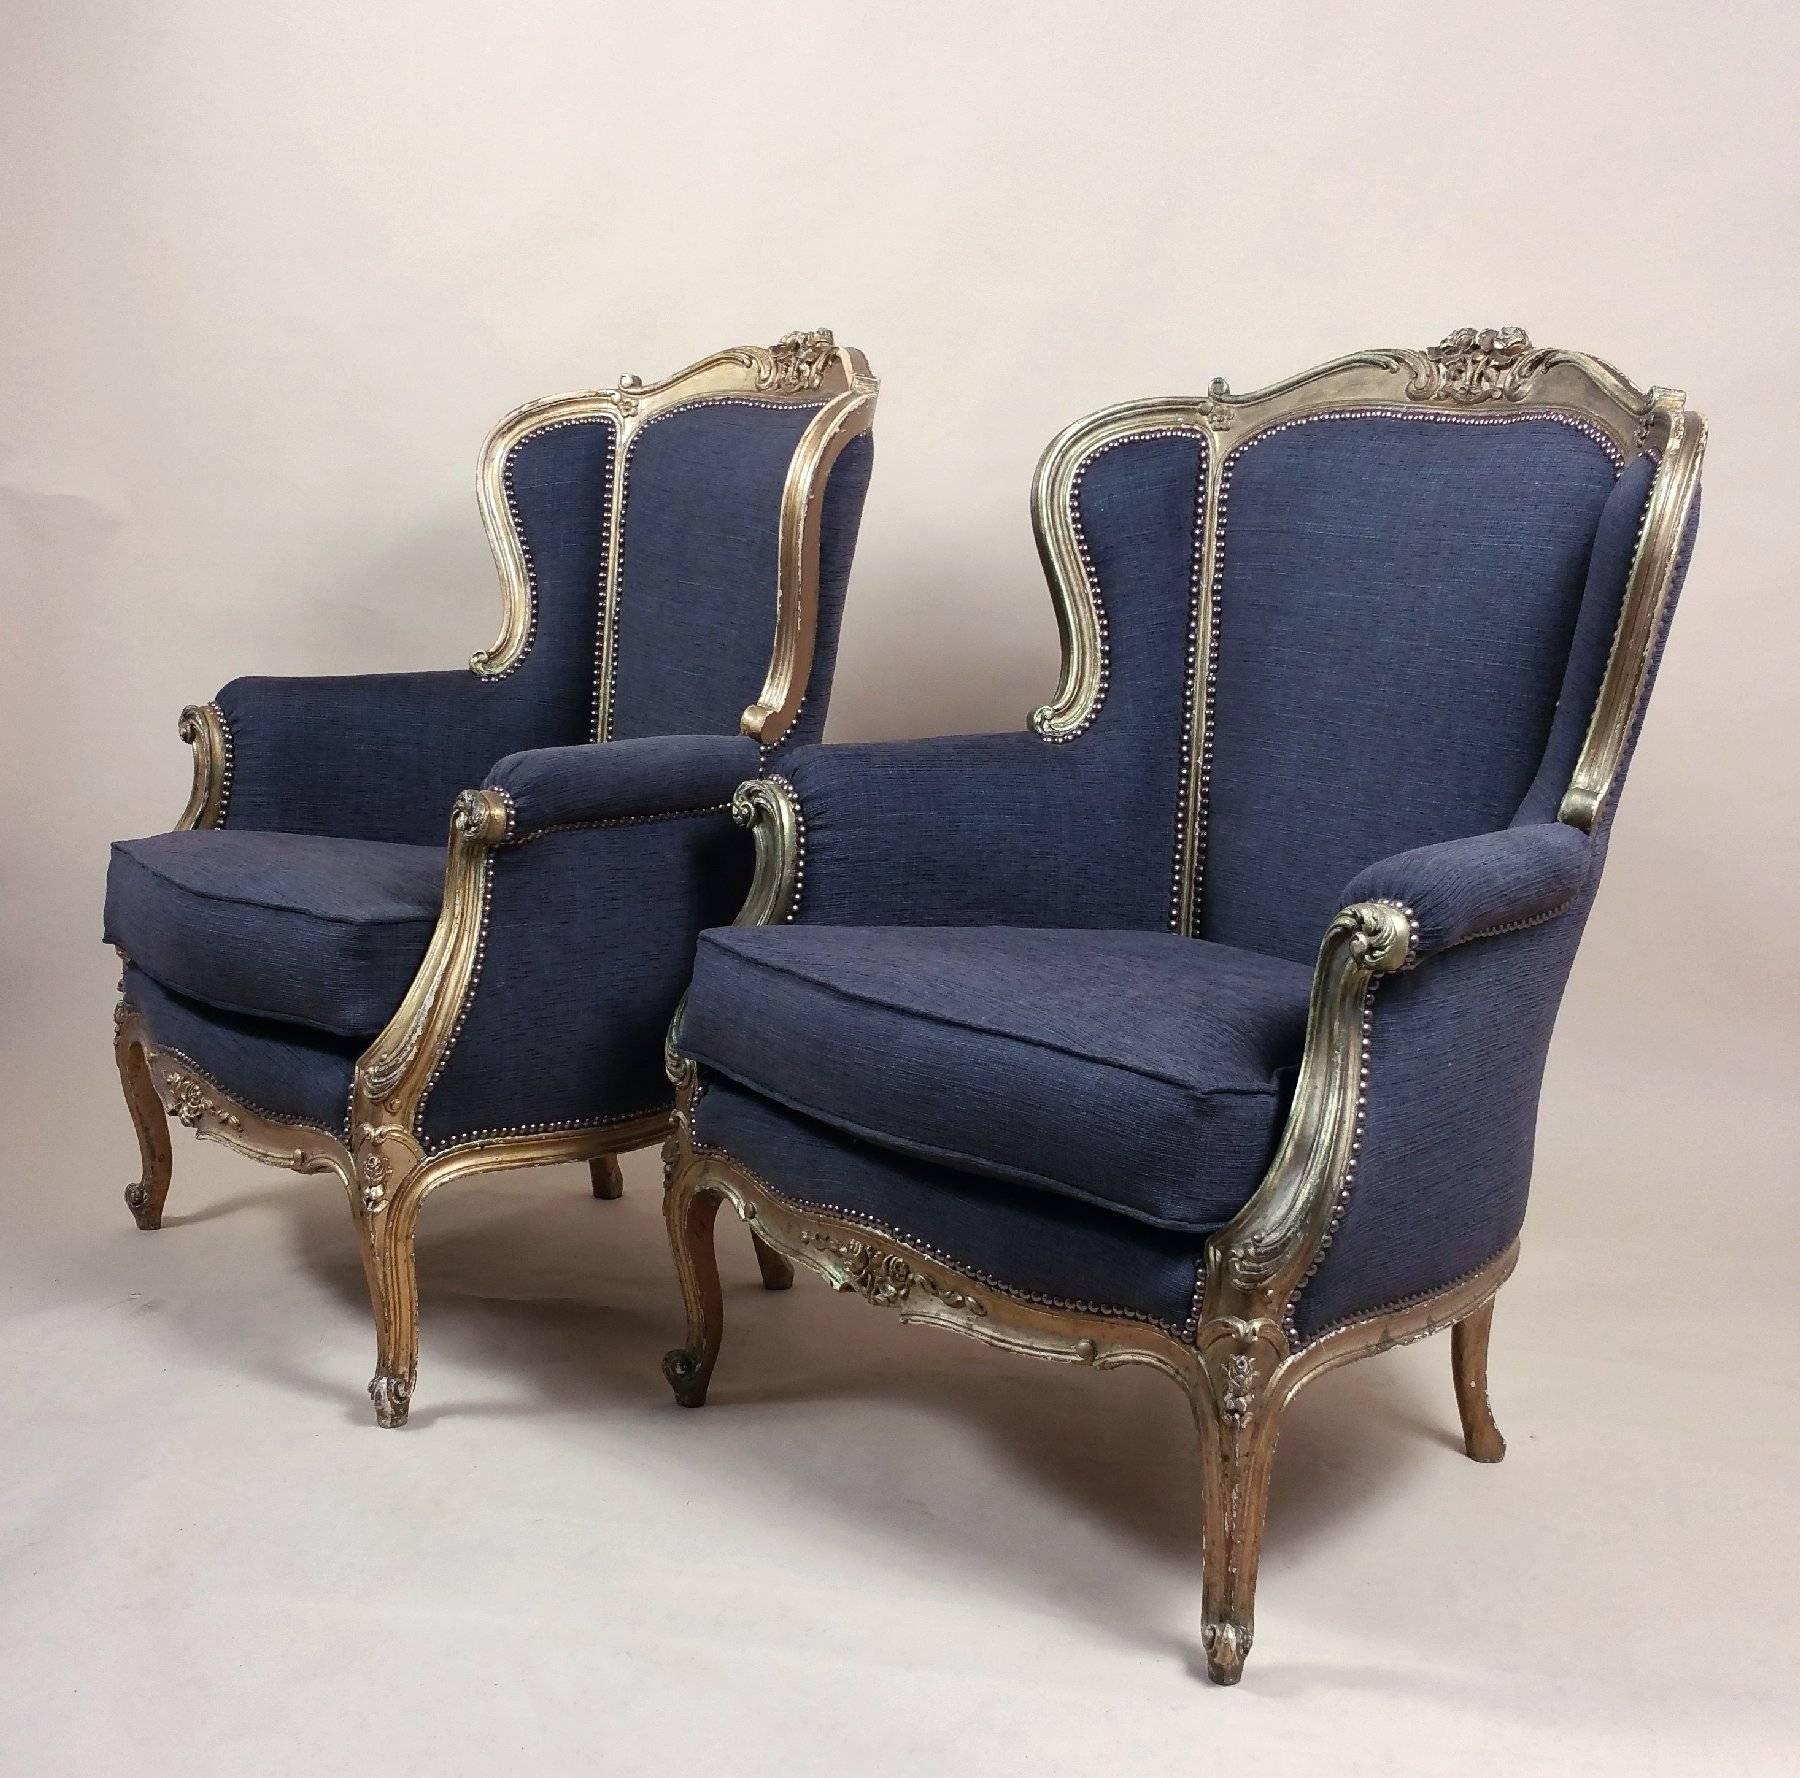 This gorgeous pair of late 29th century French carved giltwood framed armchairs are upholstered in a sumptuous charcoal colored woven fabric by Ross Kenton. Beautifully shaped and superb quality, they are not only very comfortable to sit in but make